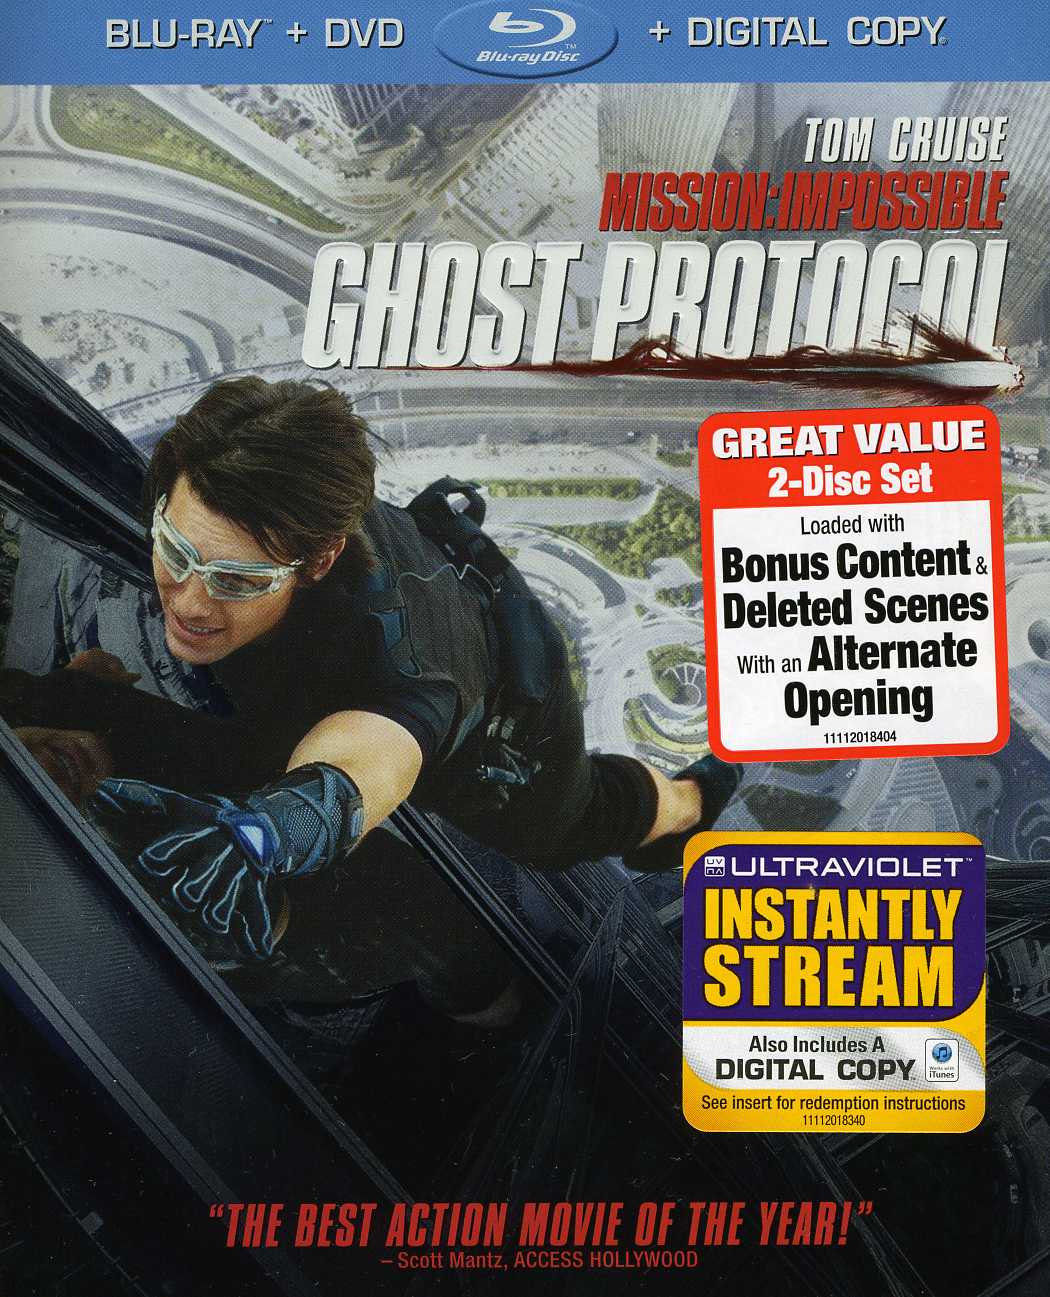 MISSION: IMPOSSIBLE GHOST PROTOCOL (2PC) (W/DVD)